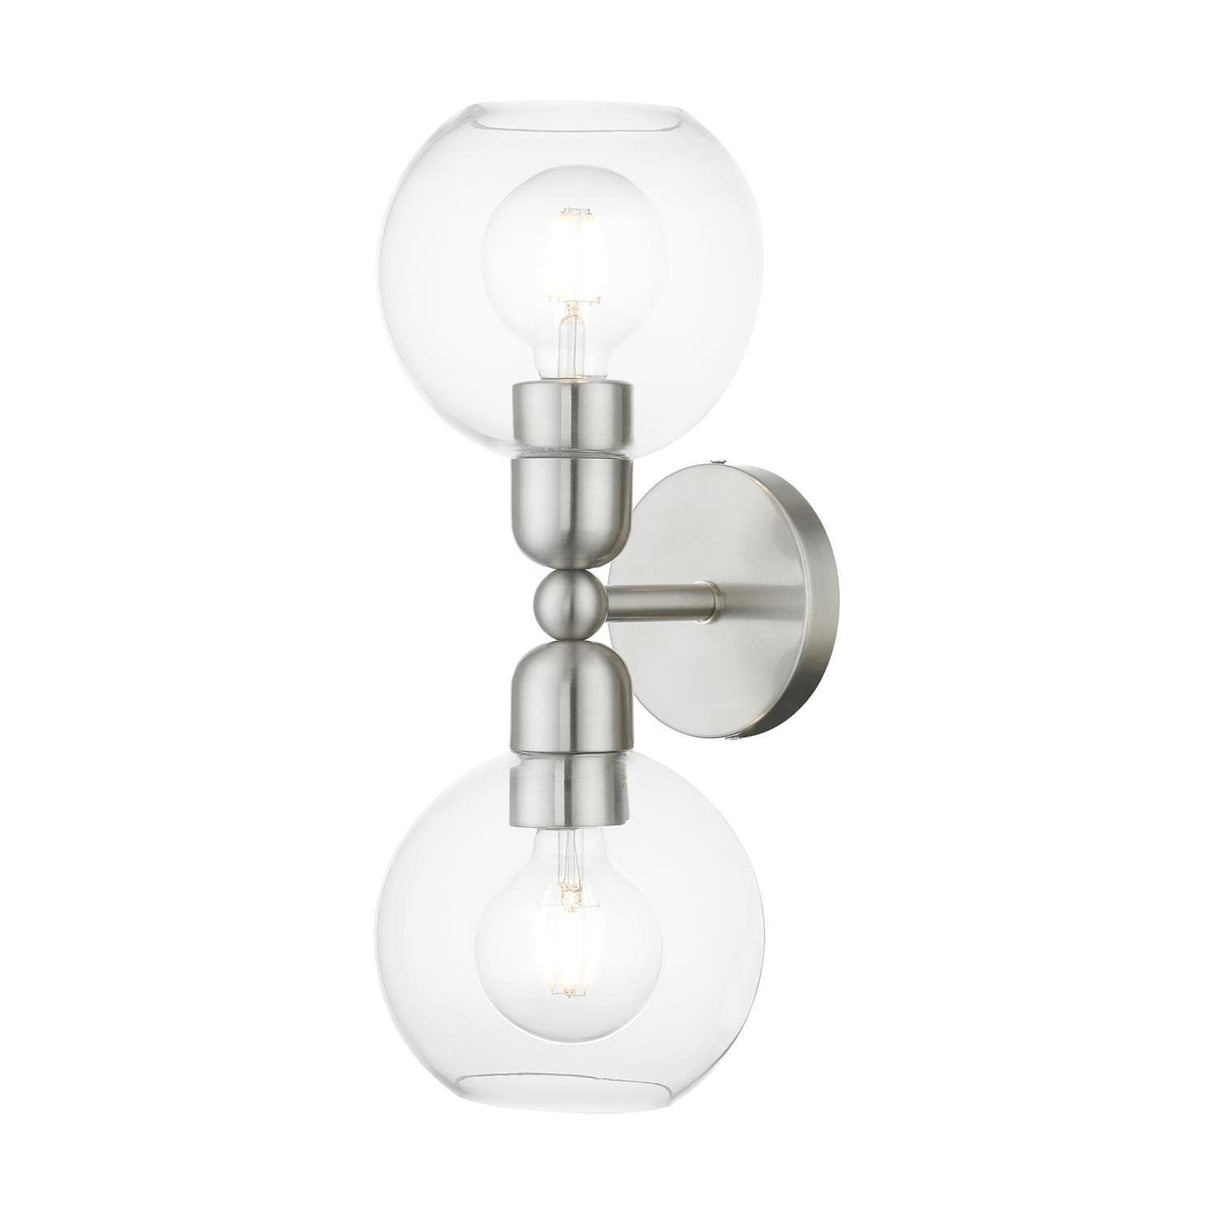 Livex Lighting 16972-91 Downtown 2 Light 7 inch Brushed Nickel Vanity Sconce Wall Light, Sphere